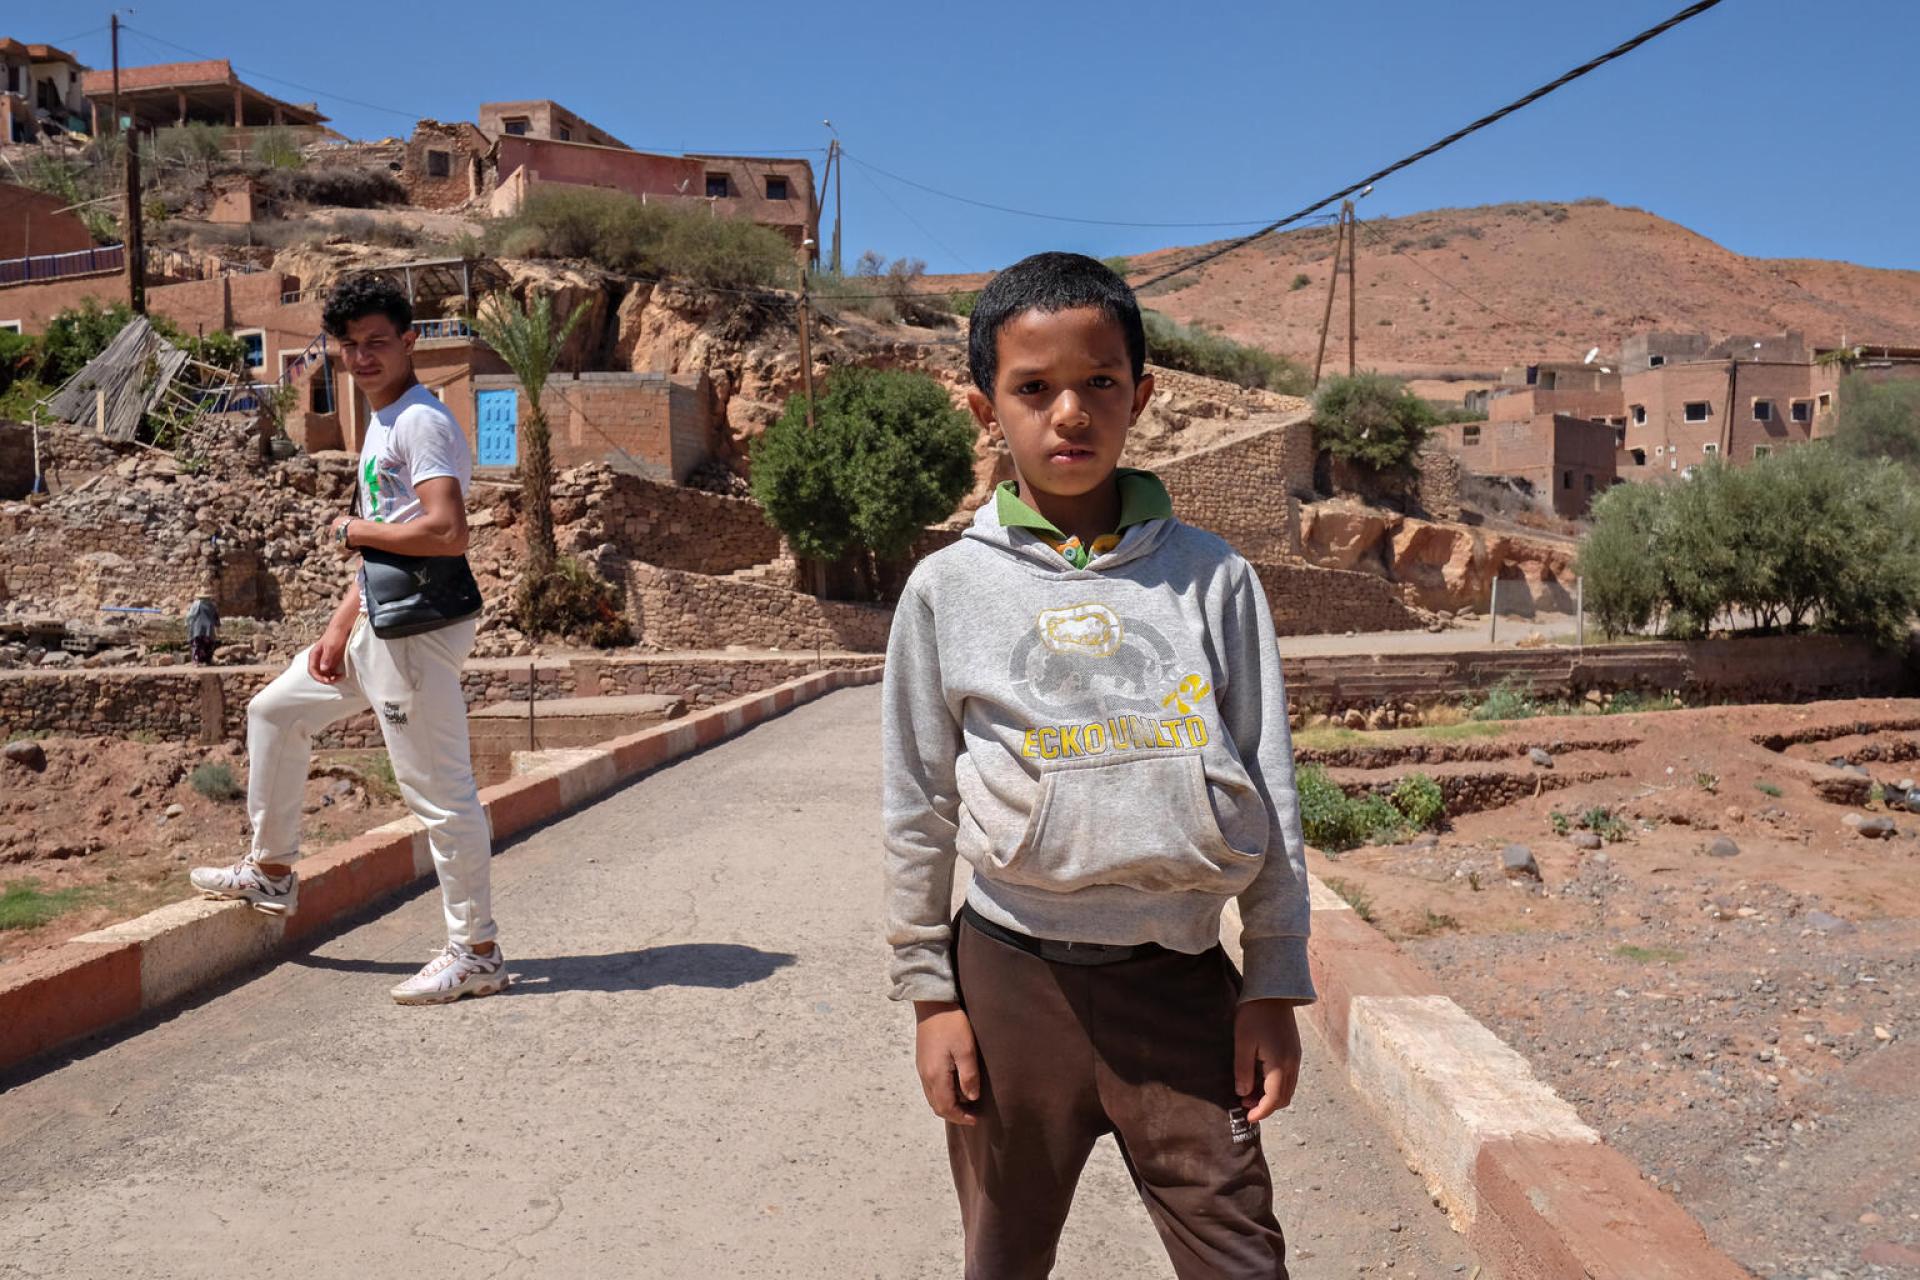 Moroccan child and youth in the street